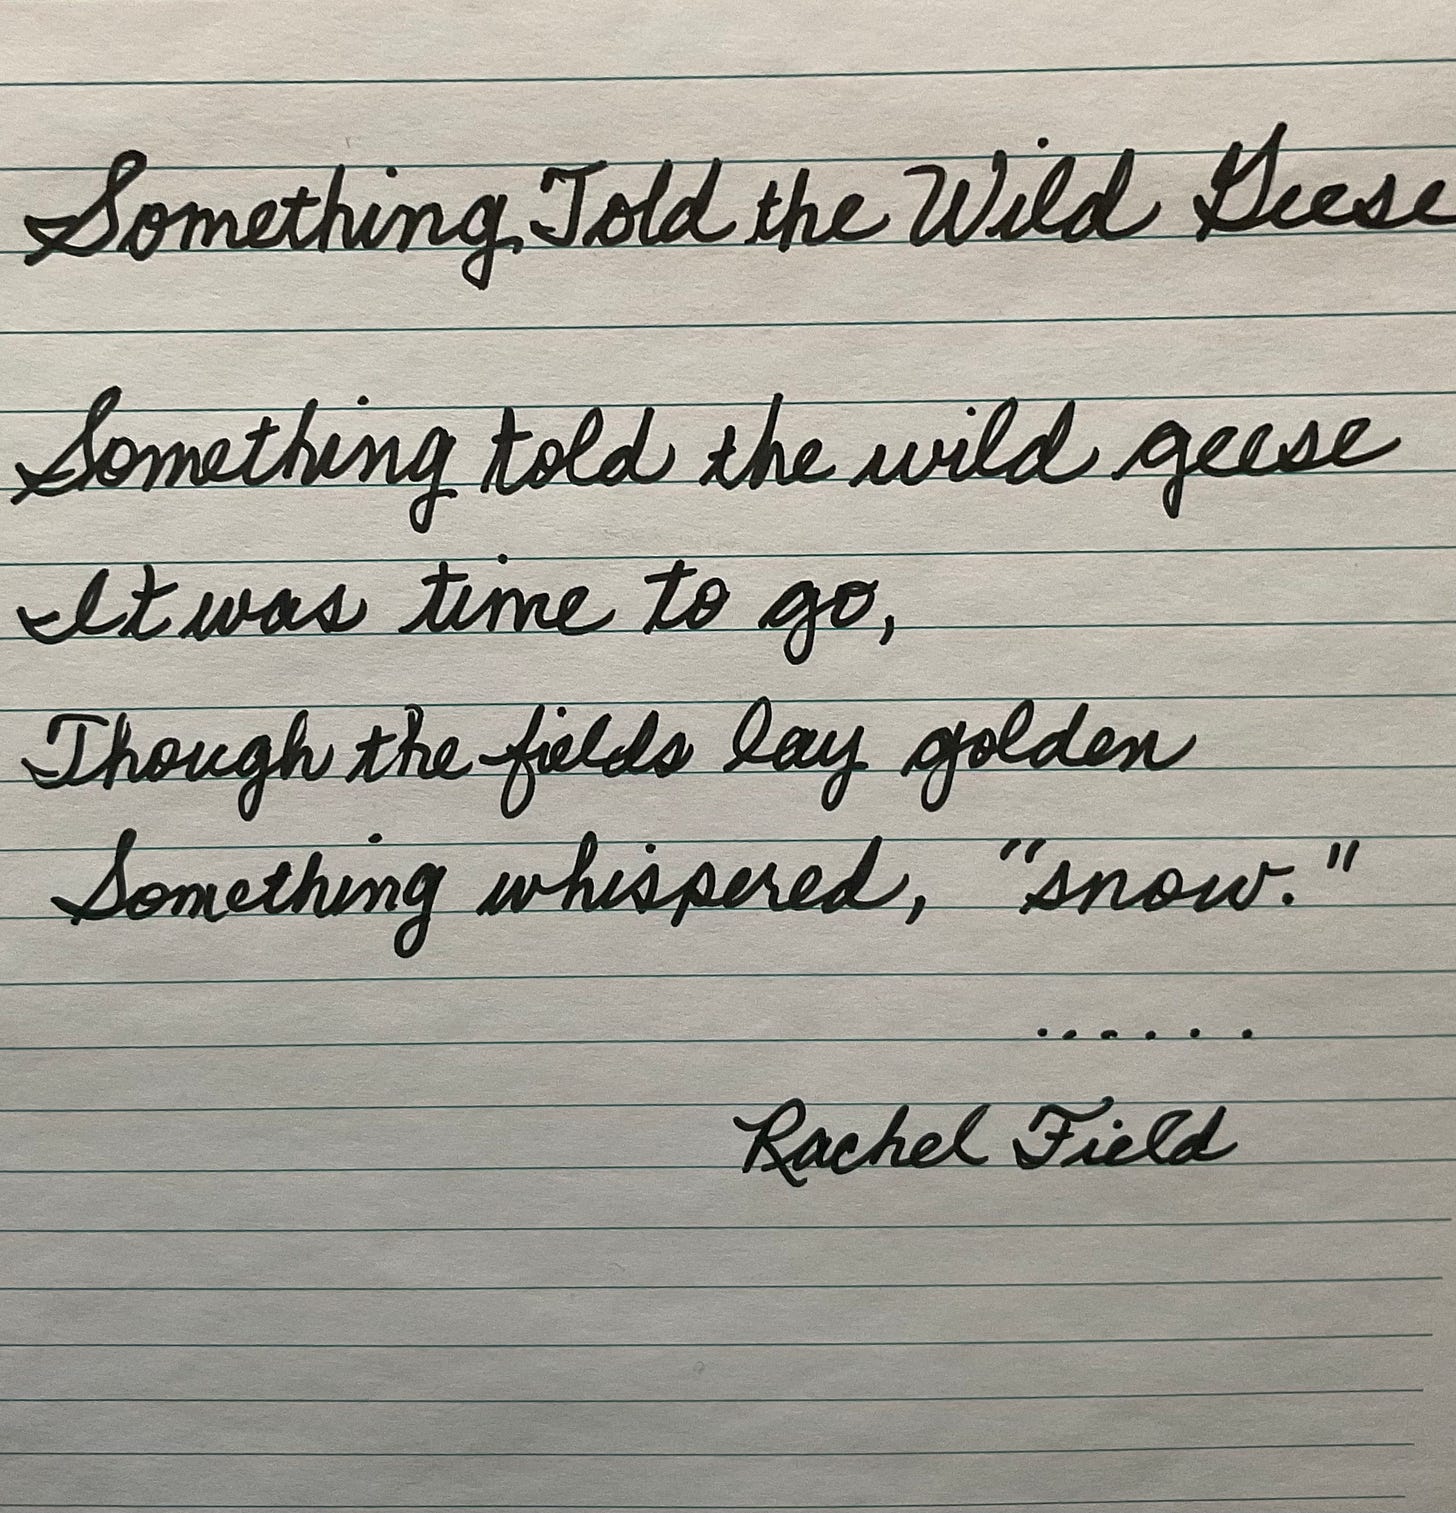 Text written in cursive writing on lined paper, a poem by Rachel Field, "Something Told the Wild Geese" a visual model by Sherry Killam Arts.